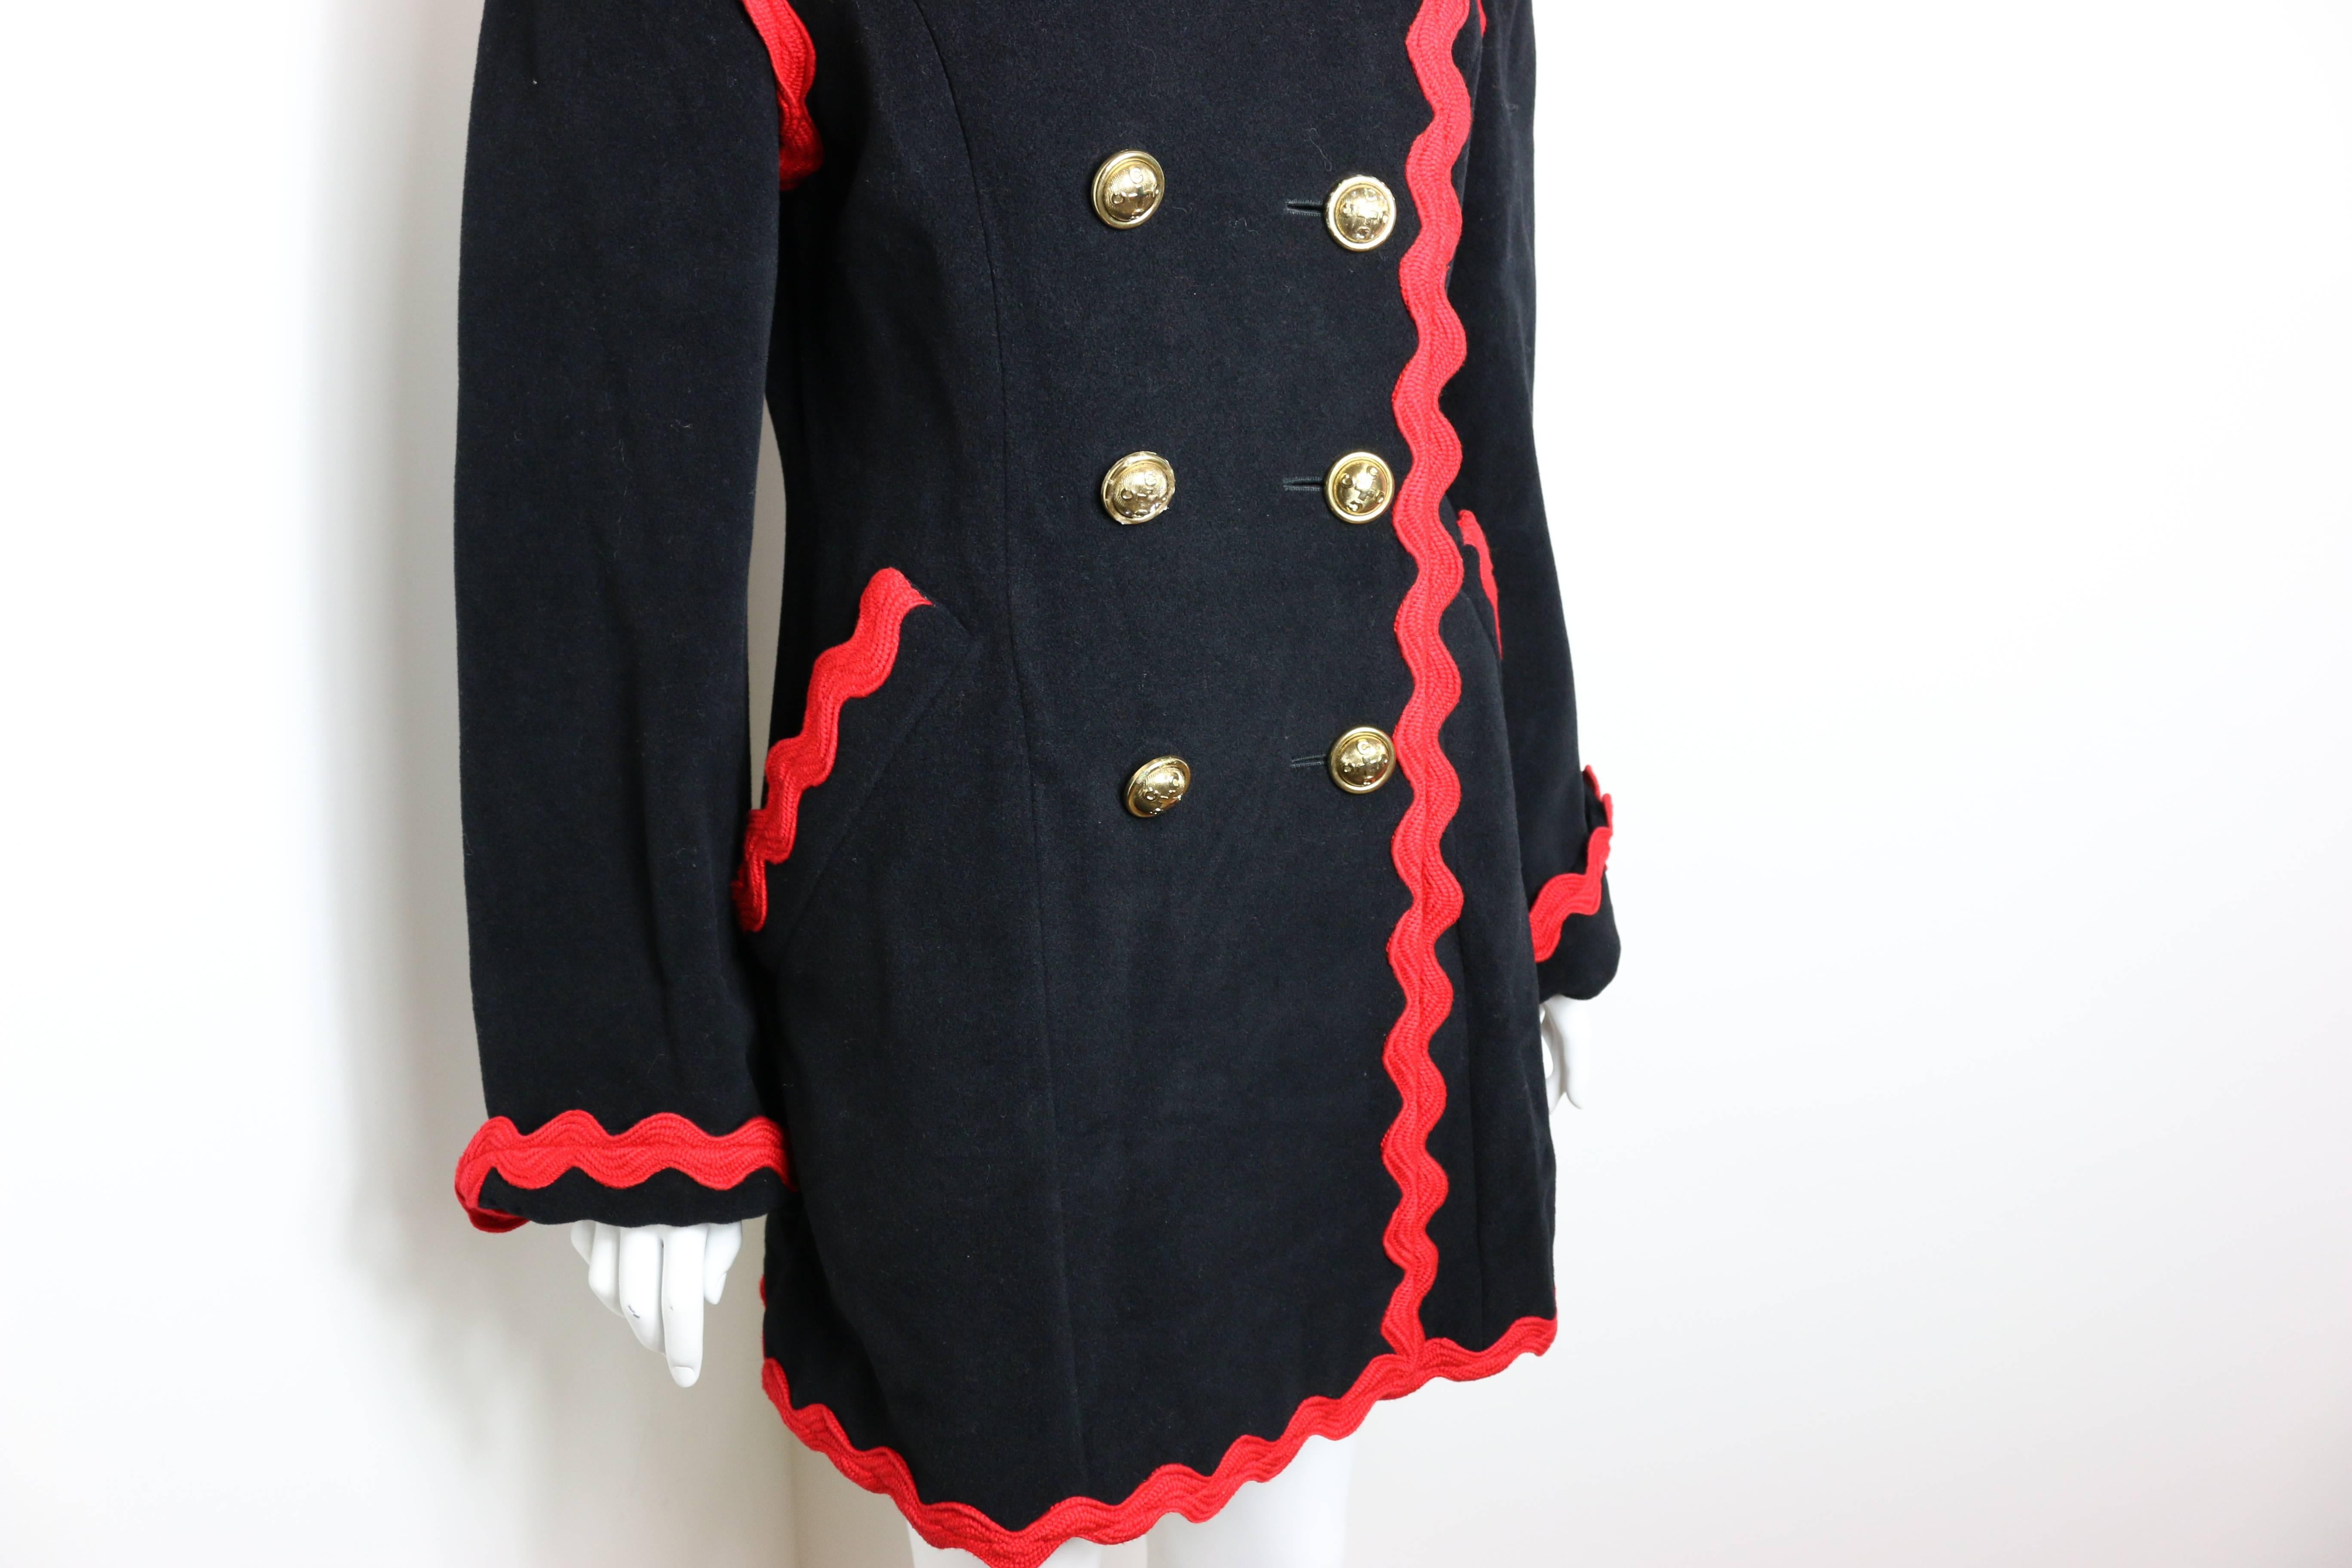 - Vintage 90s Frank Moschino Cheap and Chic wool black with red piping trim double breasted coat. 

- Featuring ten panel front gold buttons. 

- Two red piping trim pockets. 

- Red sewn inside lining written 